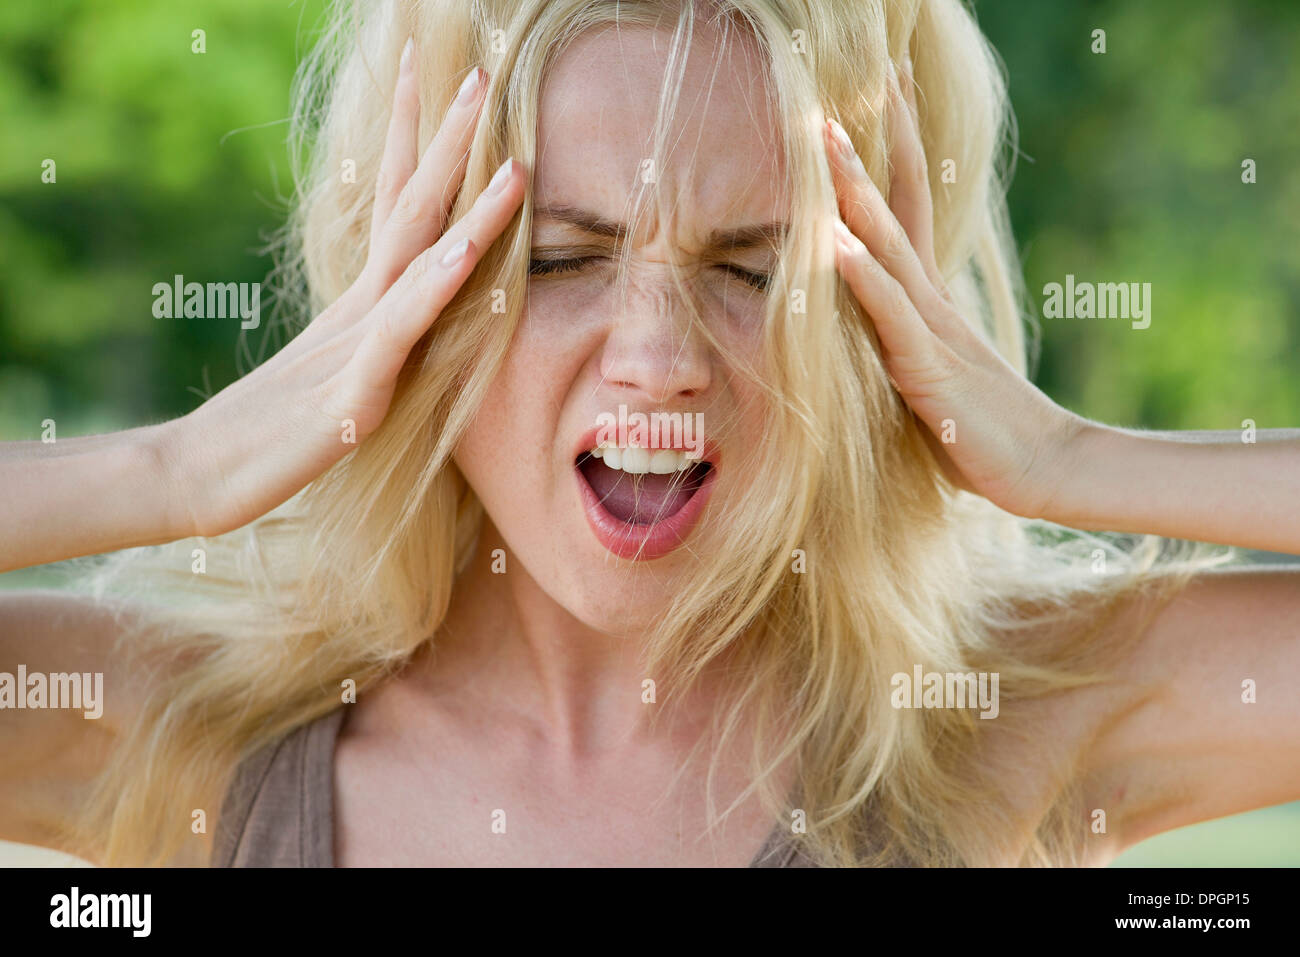 Woman with head in hands, screaming Stock Photo